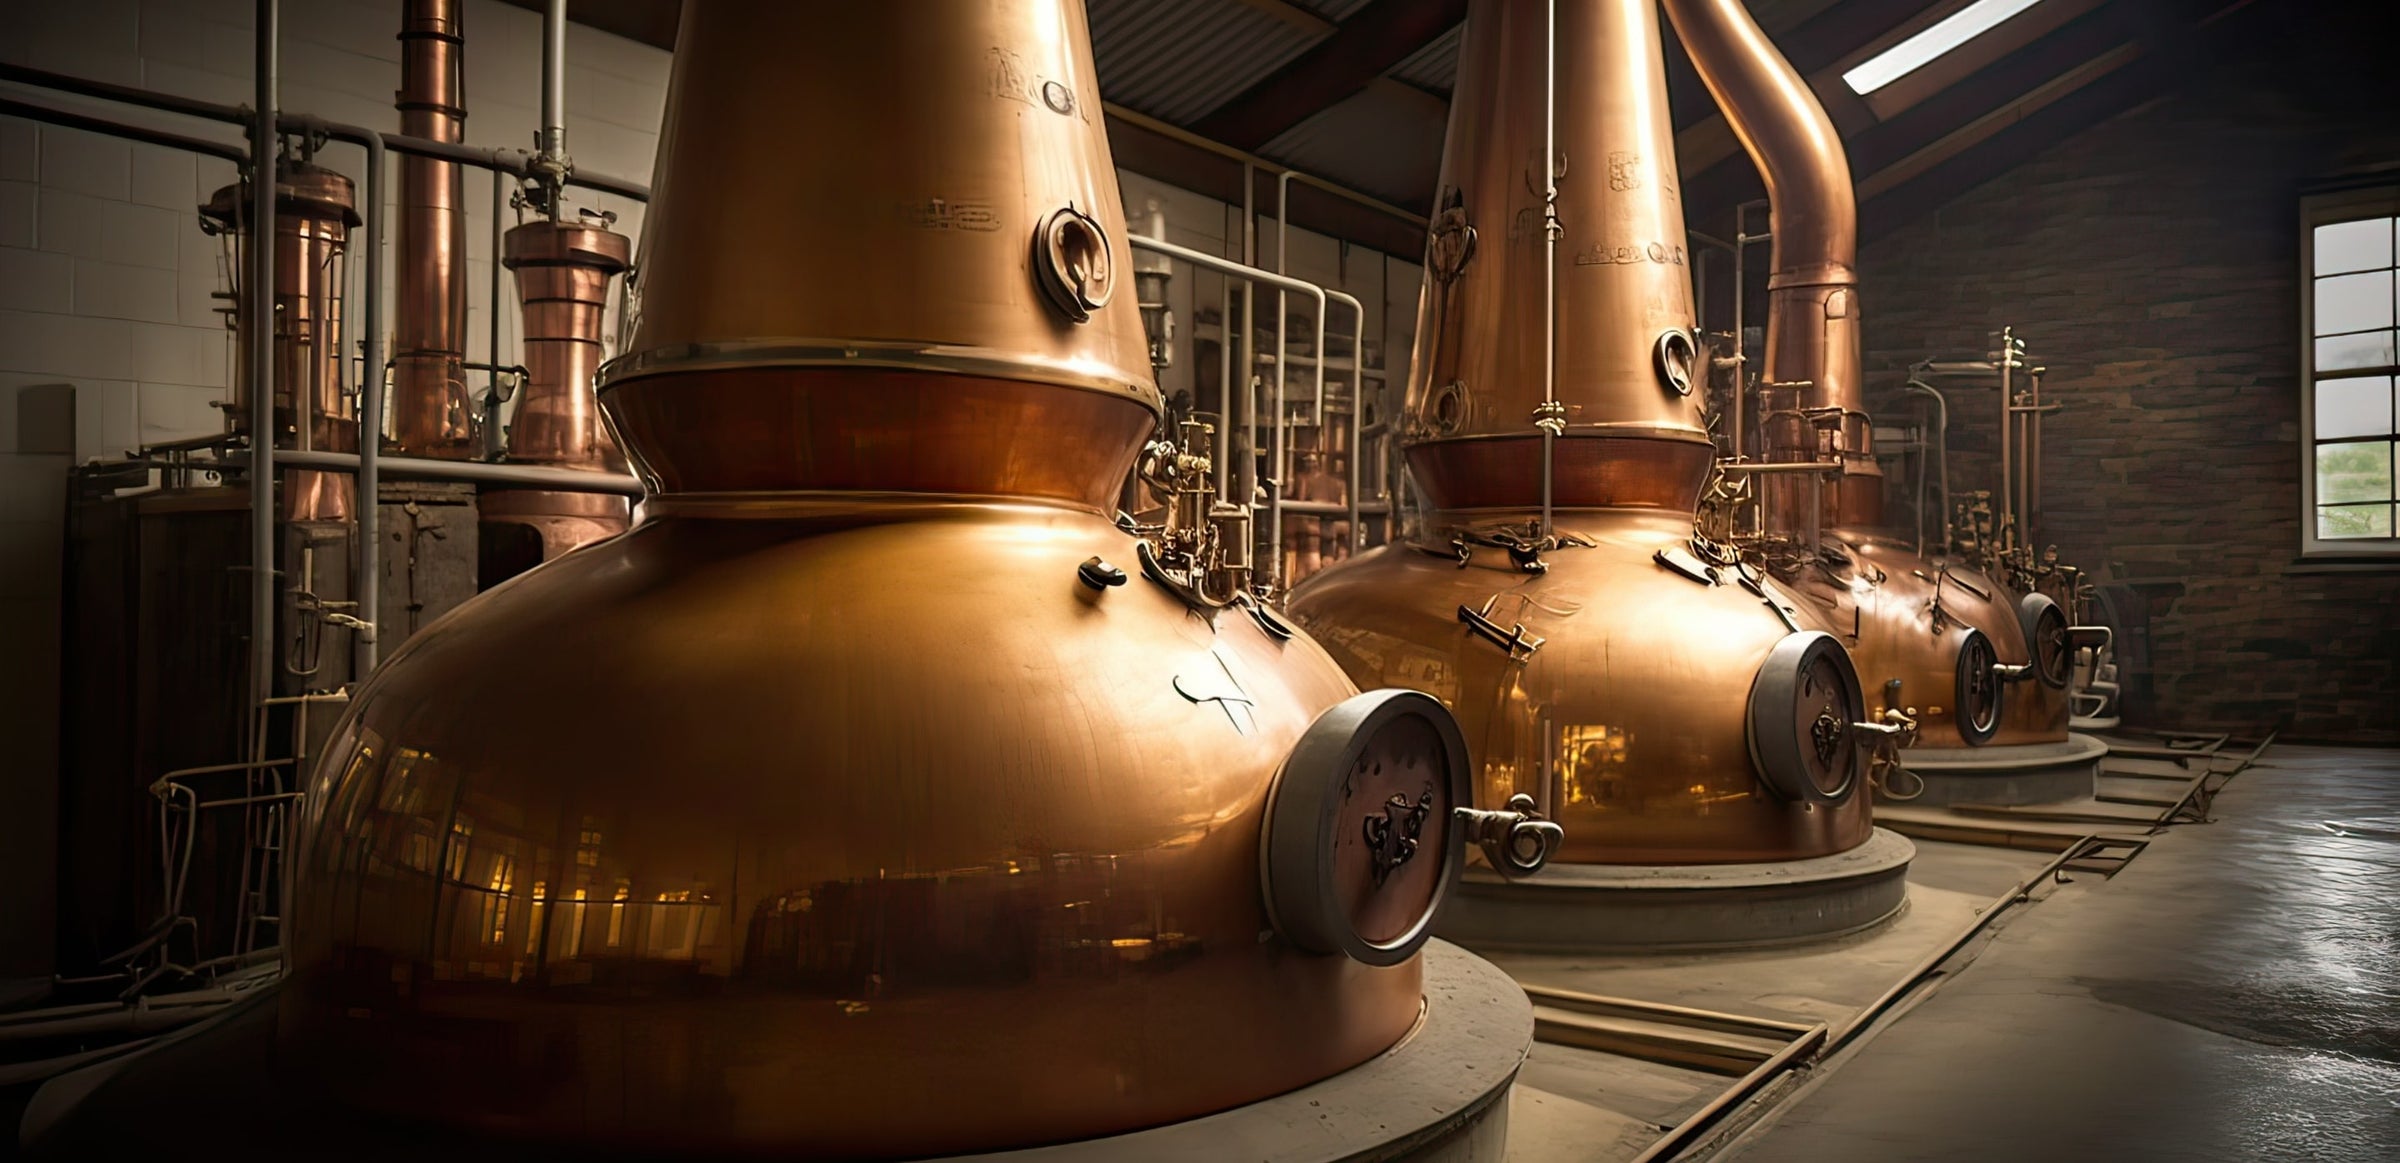 Whisky stills in a factory